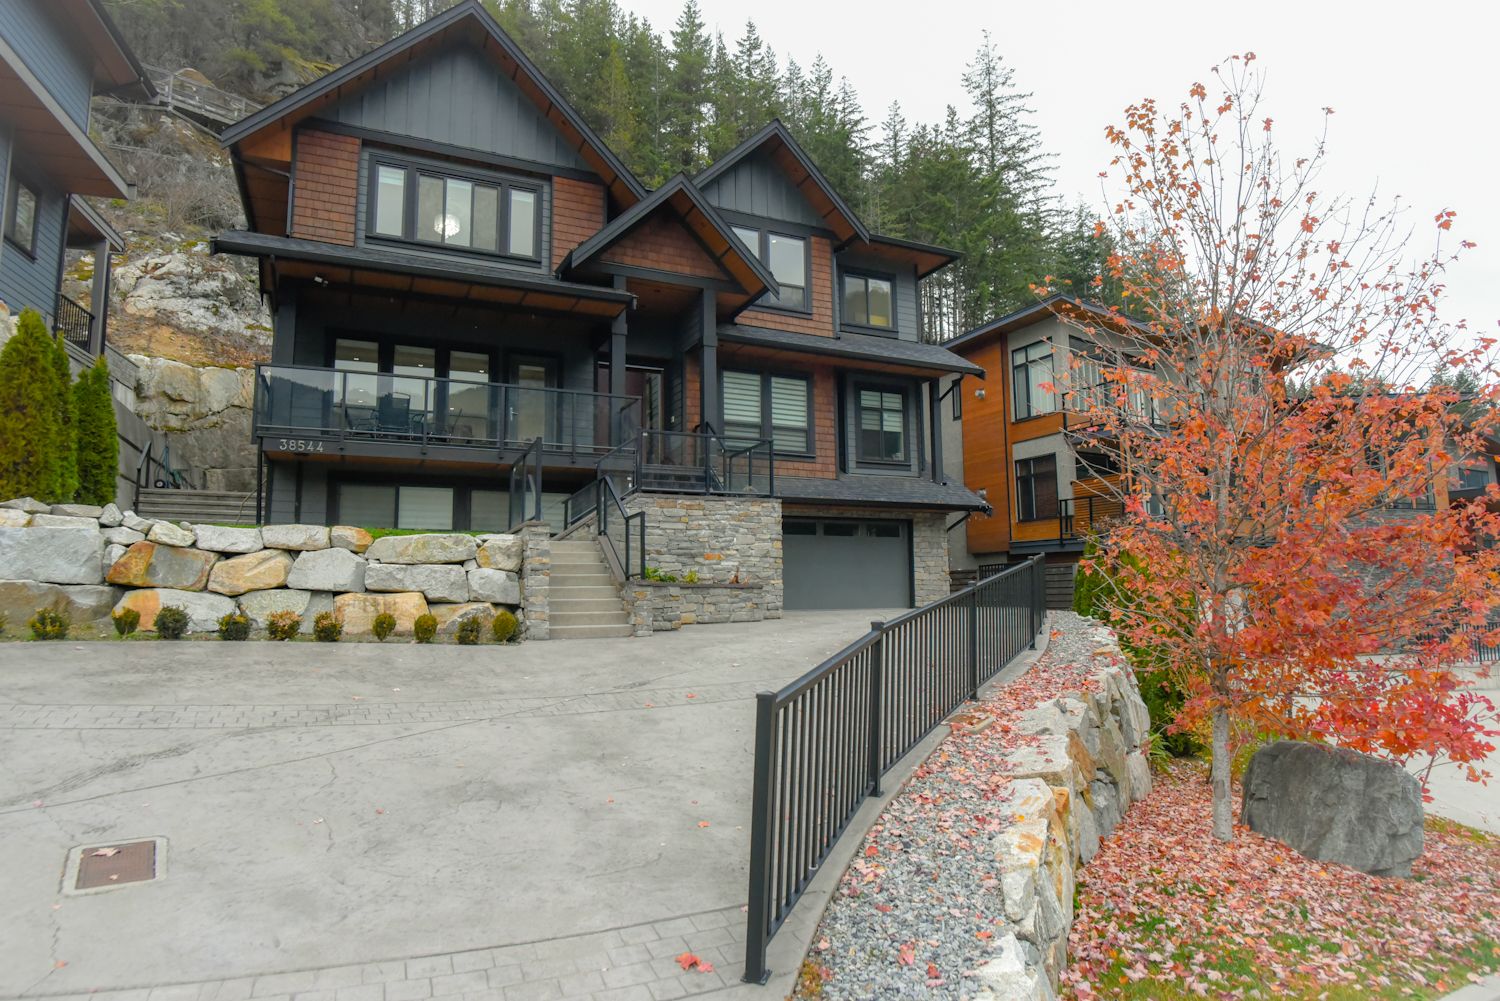 New property listed in Plateau, Squamish